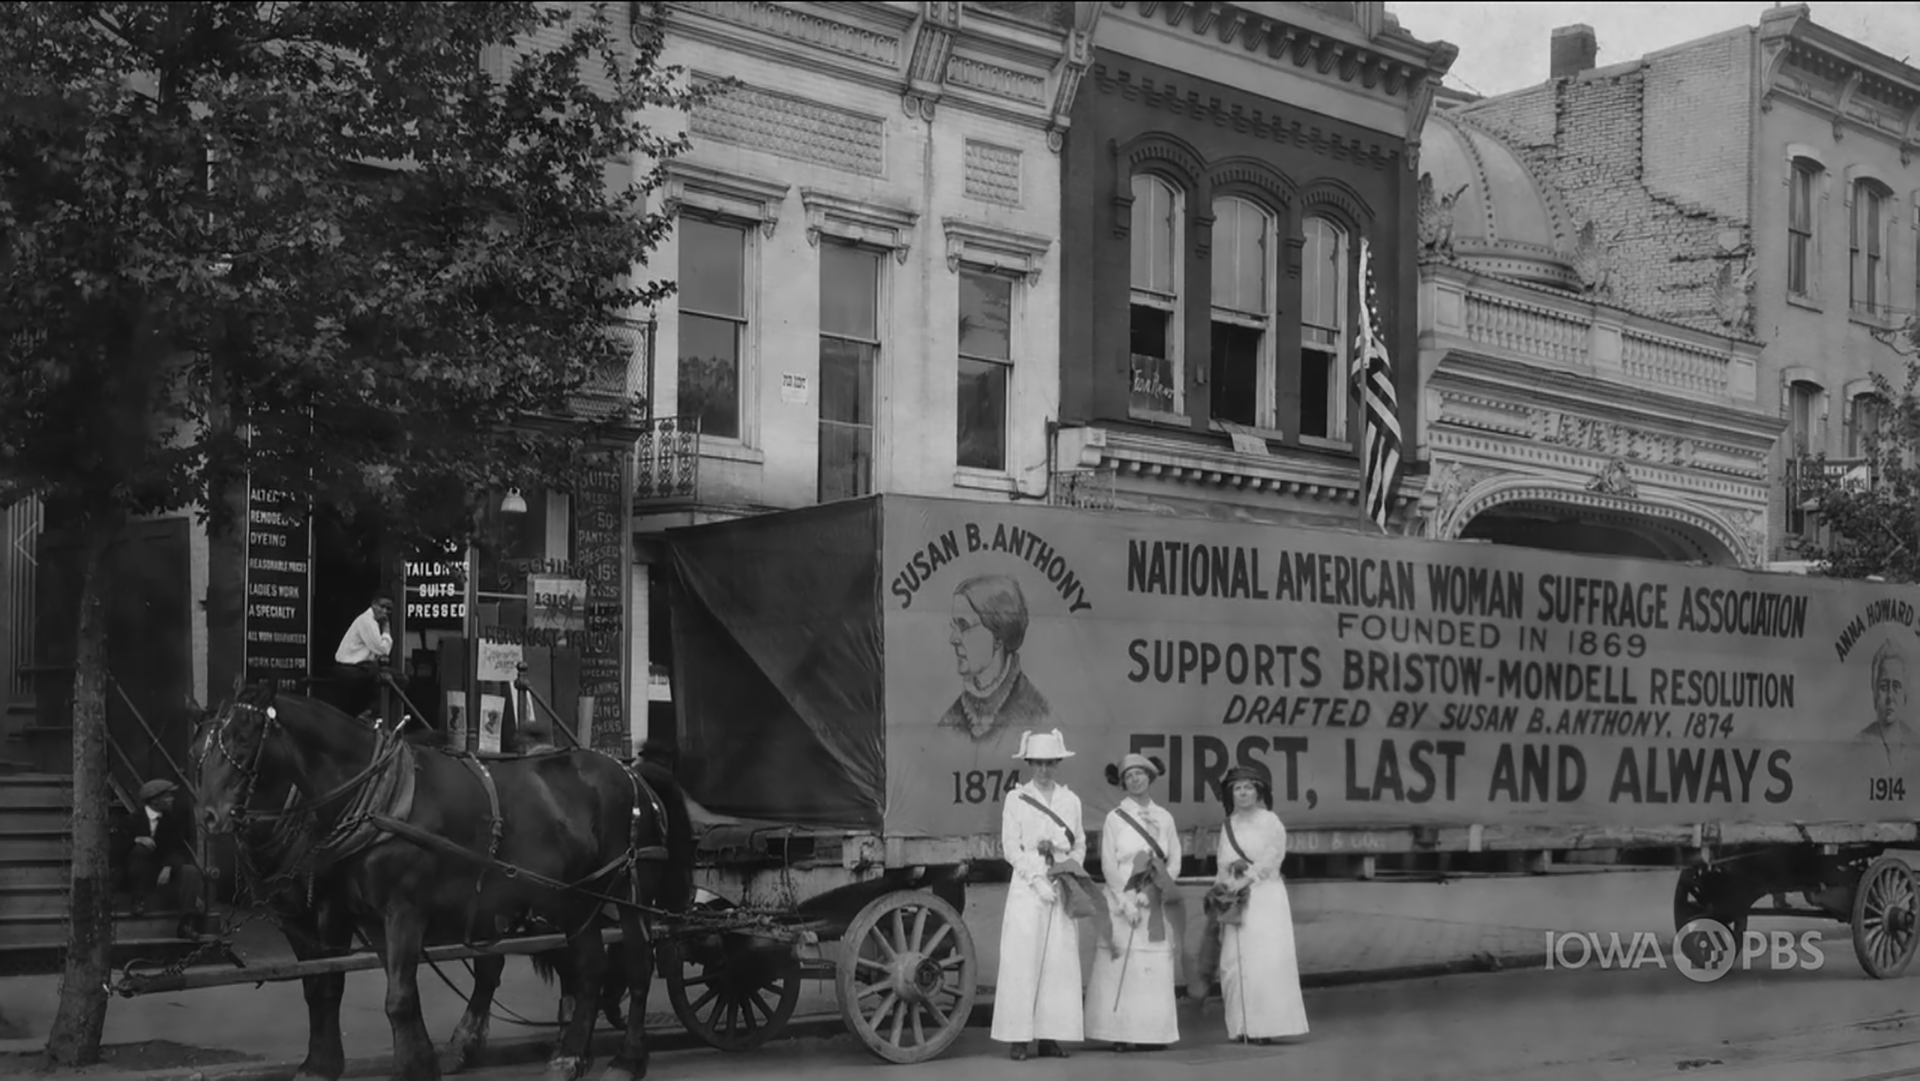 Three suffragettes standing in front of a mobile advertisement.